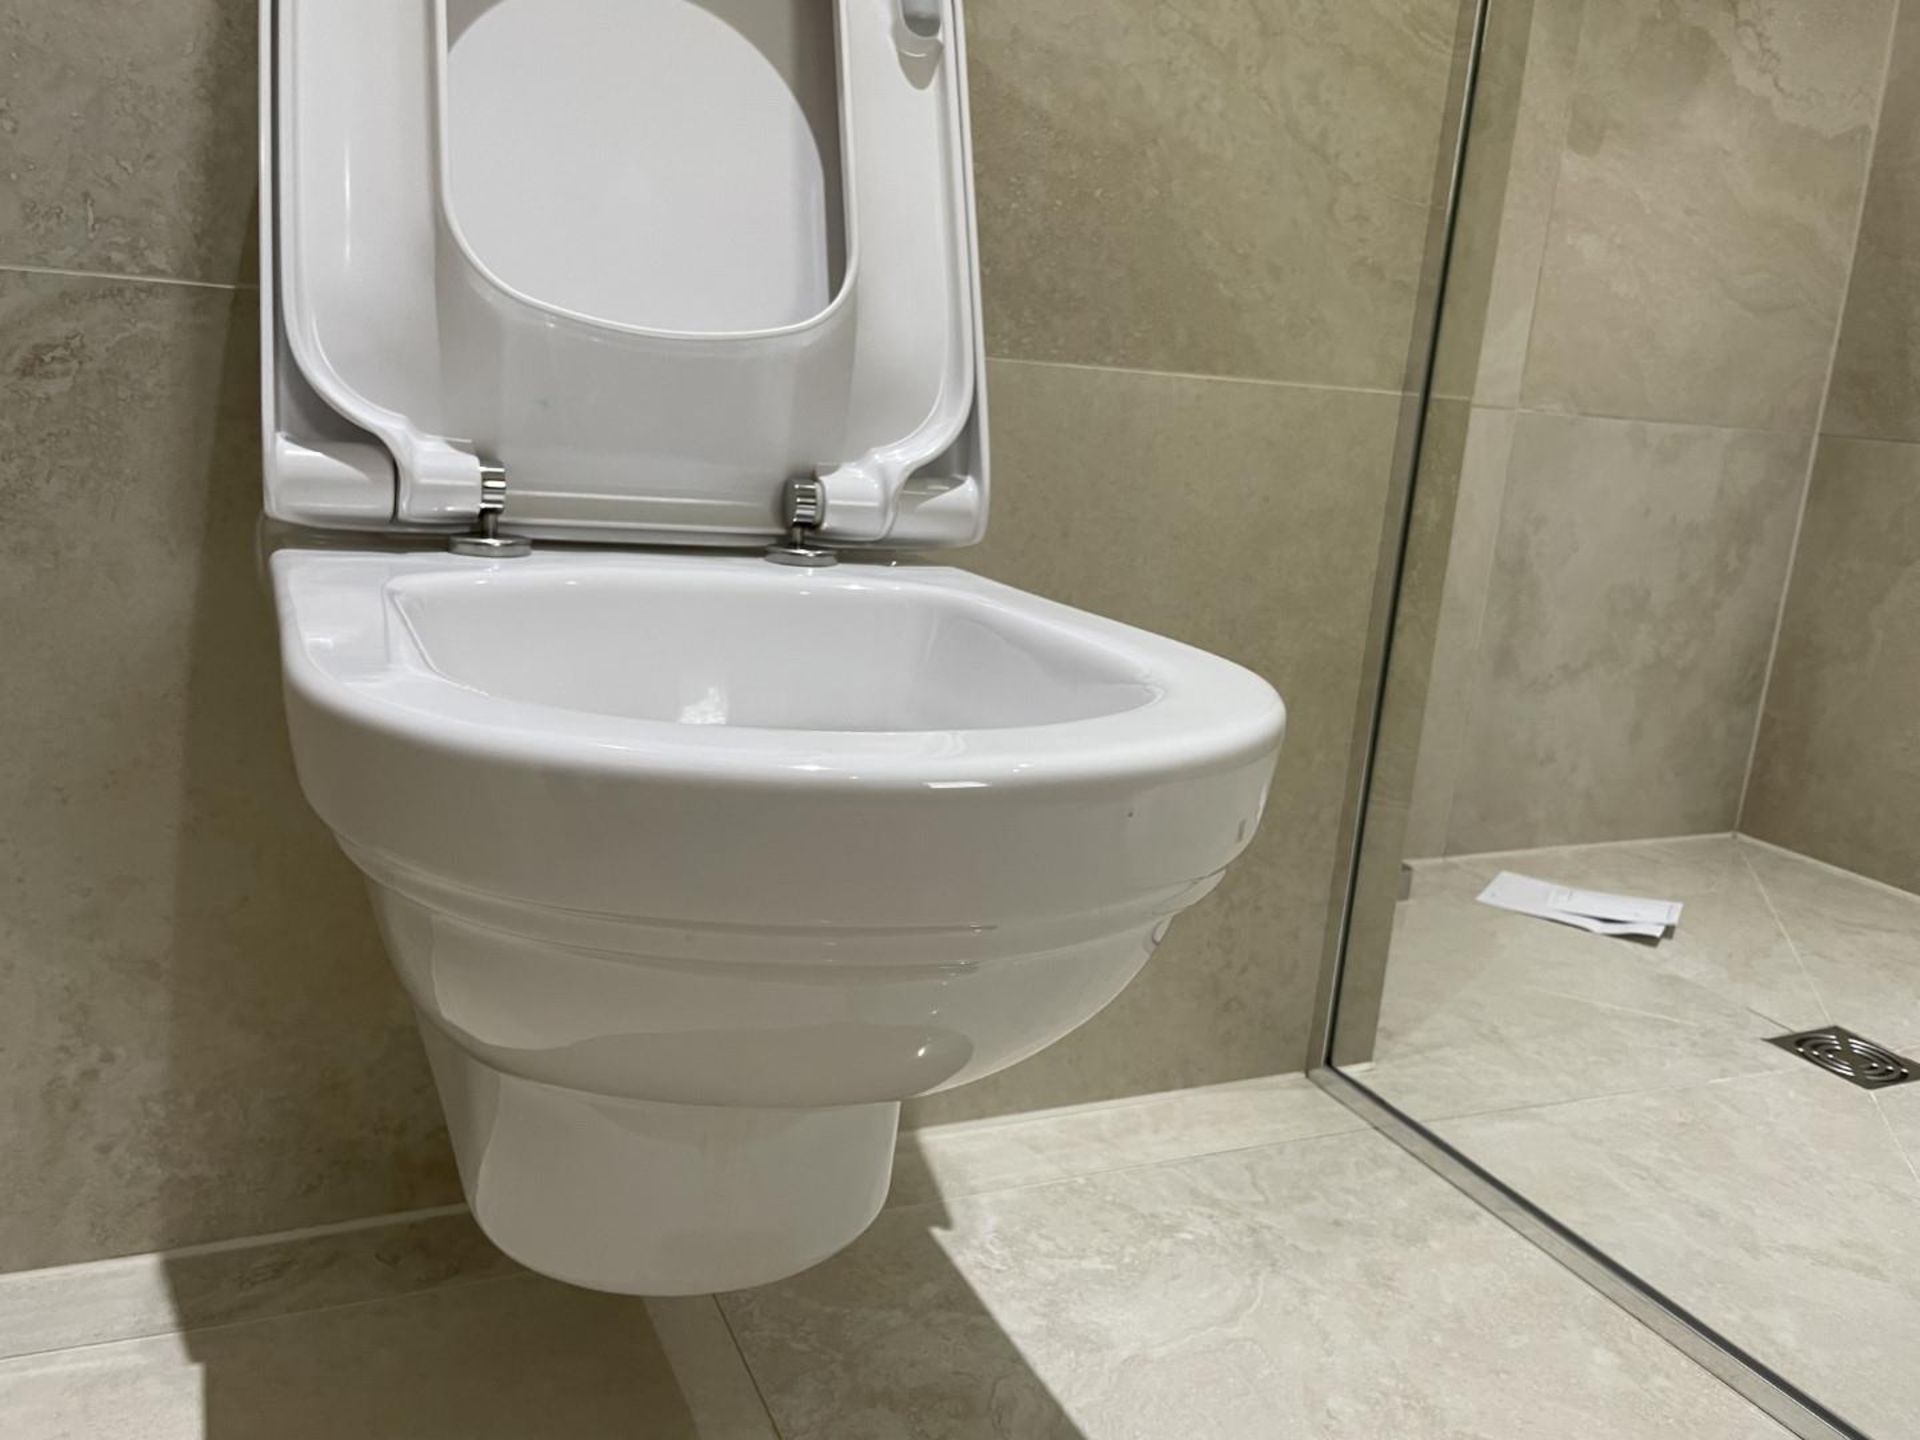 1 x VILLEROY & BOCH Wall Hung Toilet with Geberit Flush Plate - Ref: PAN249 - CL896 - NO VAT ON - Image 10 of 10